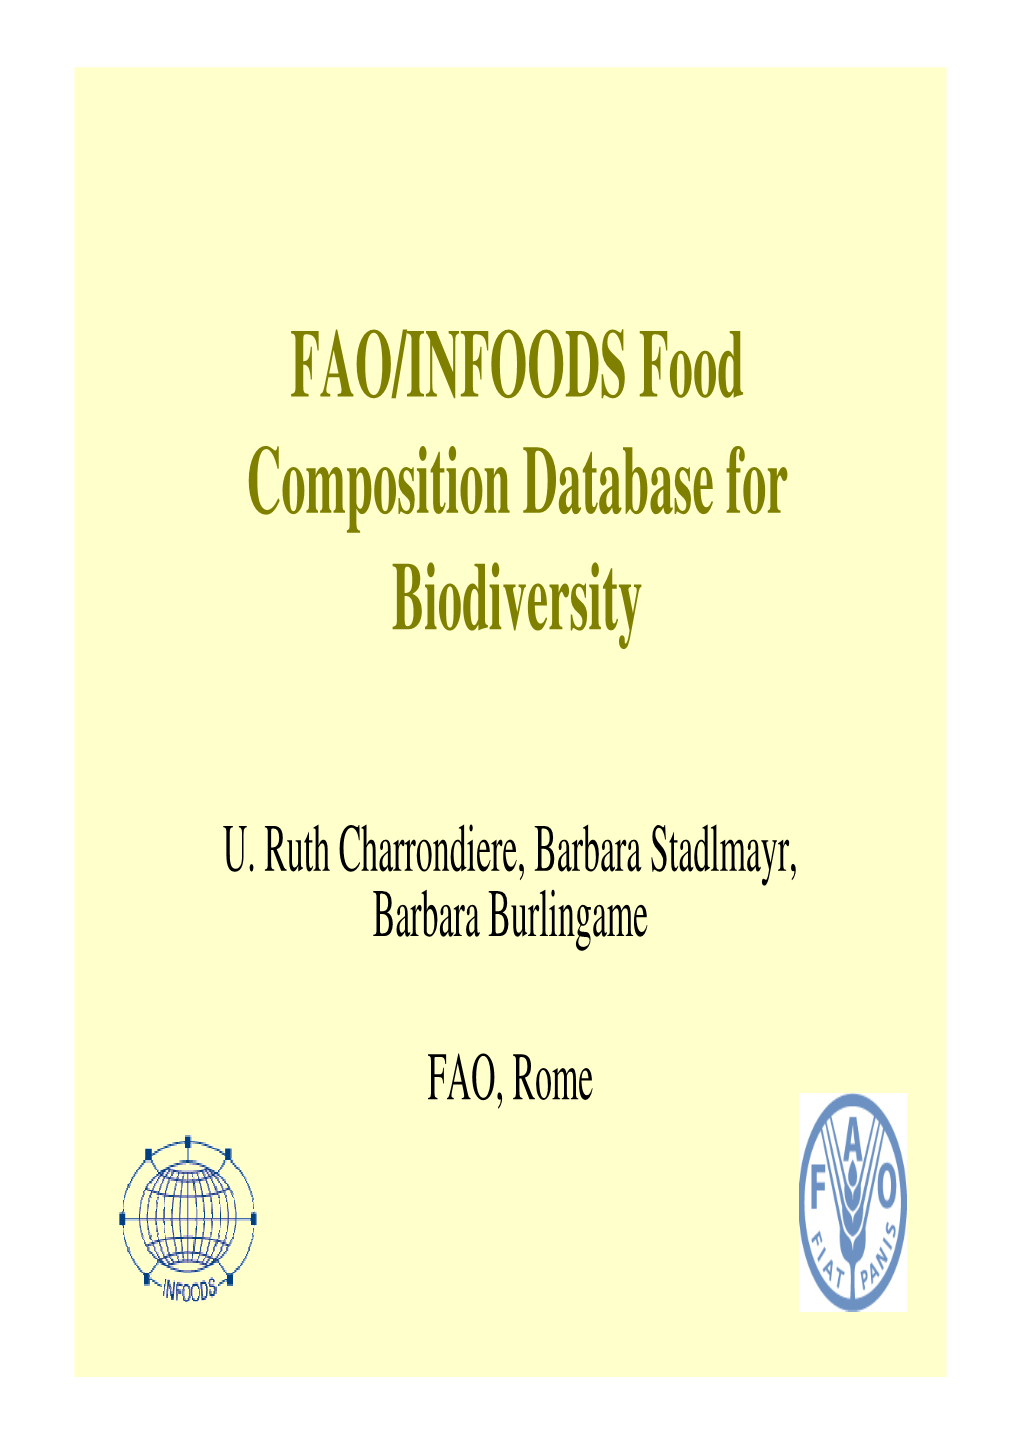 FAO/INFOODS Food Composition Database for Biodiversity